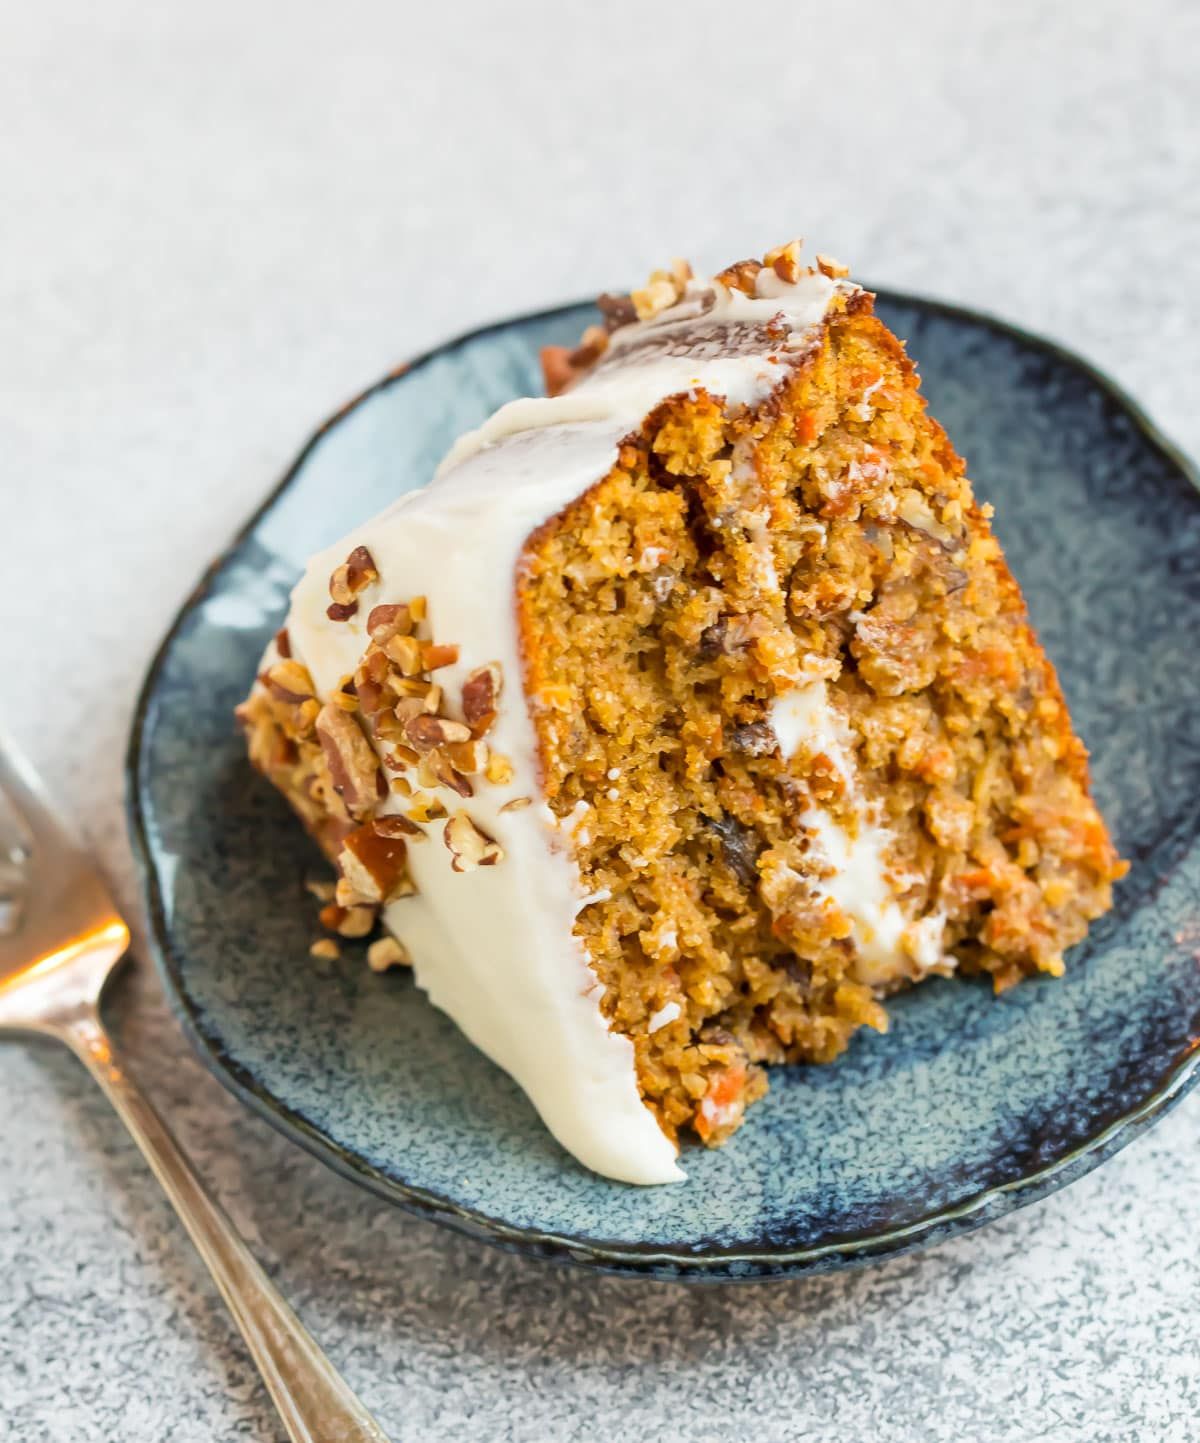 This moist, fluffy Gluten Free Carrot Cake is made with ...